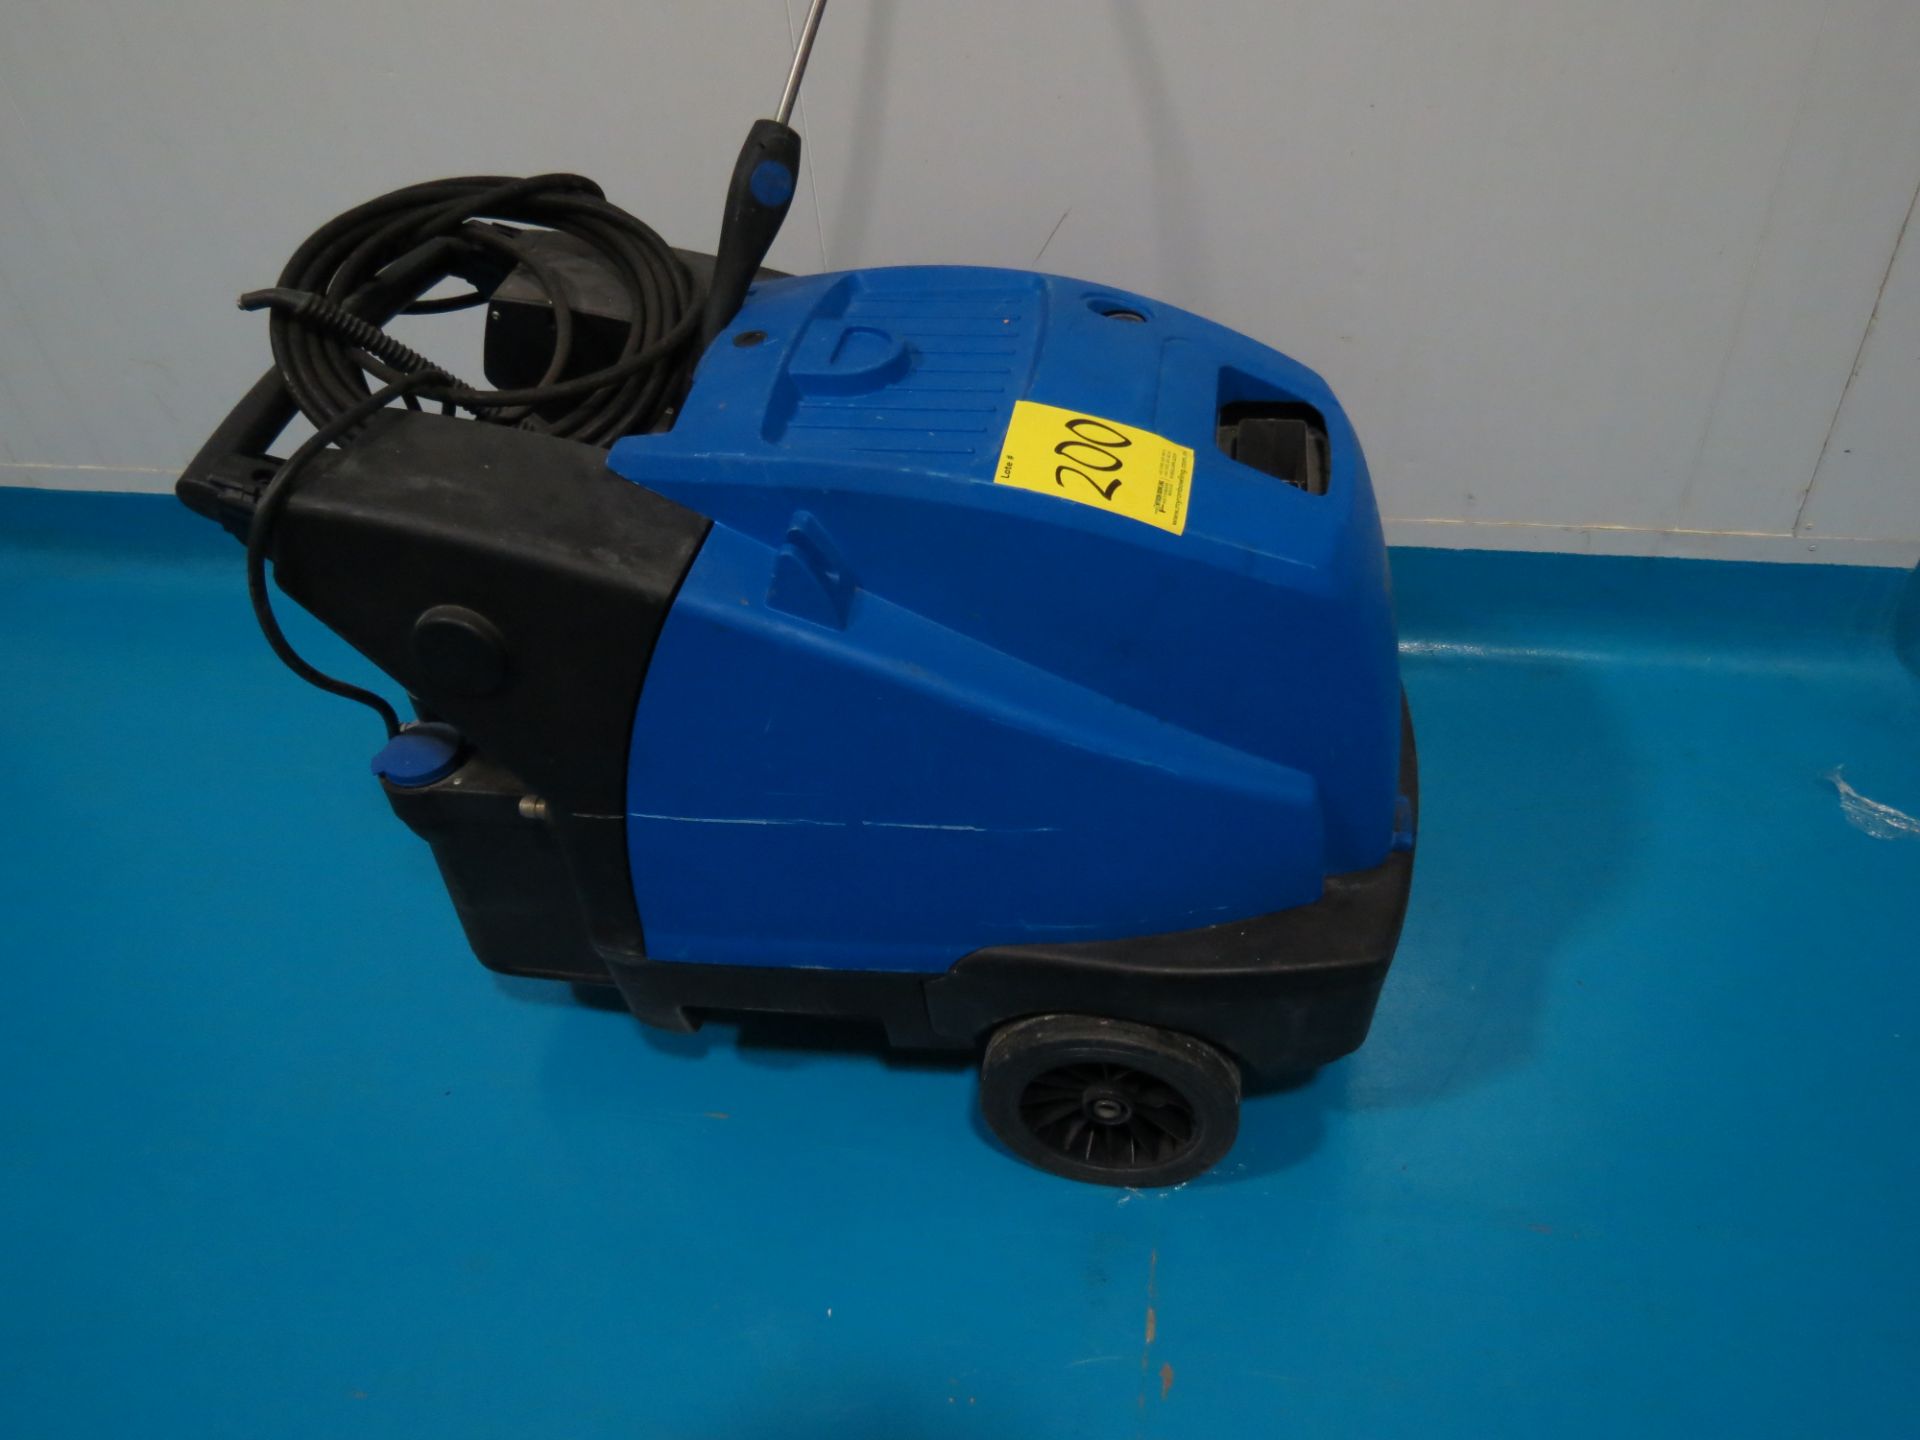 Alto High pressure washing machine brand Nilfisk with Hot Water, Capacity 6.7 L/min - Image 2 of 7